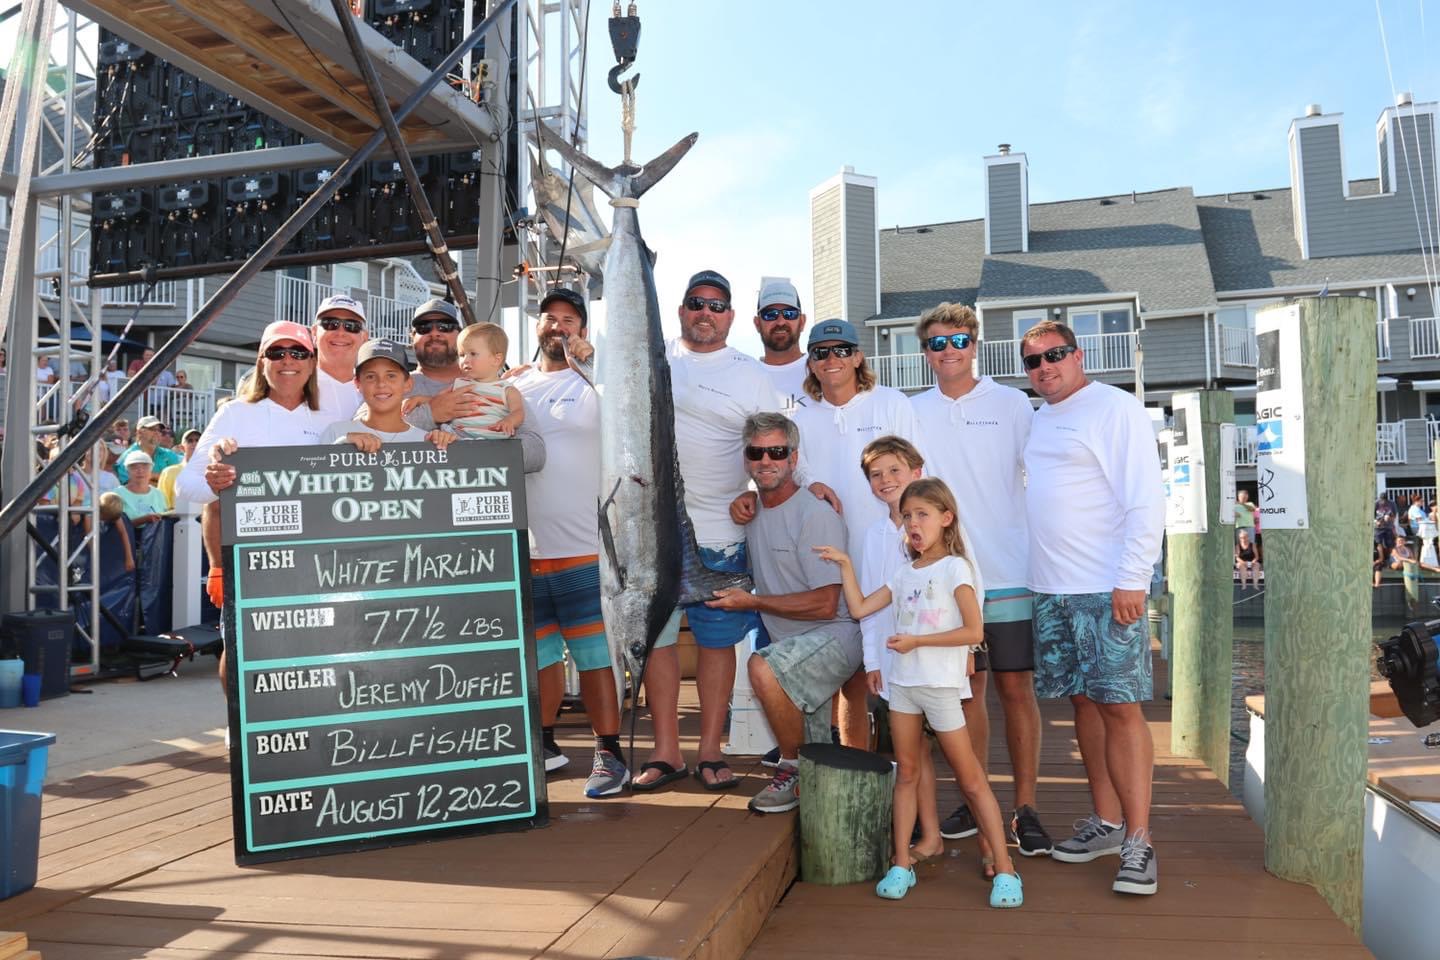 duffie bros MD white marlin open